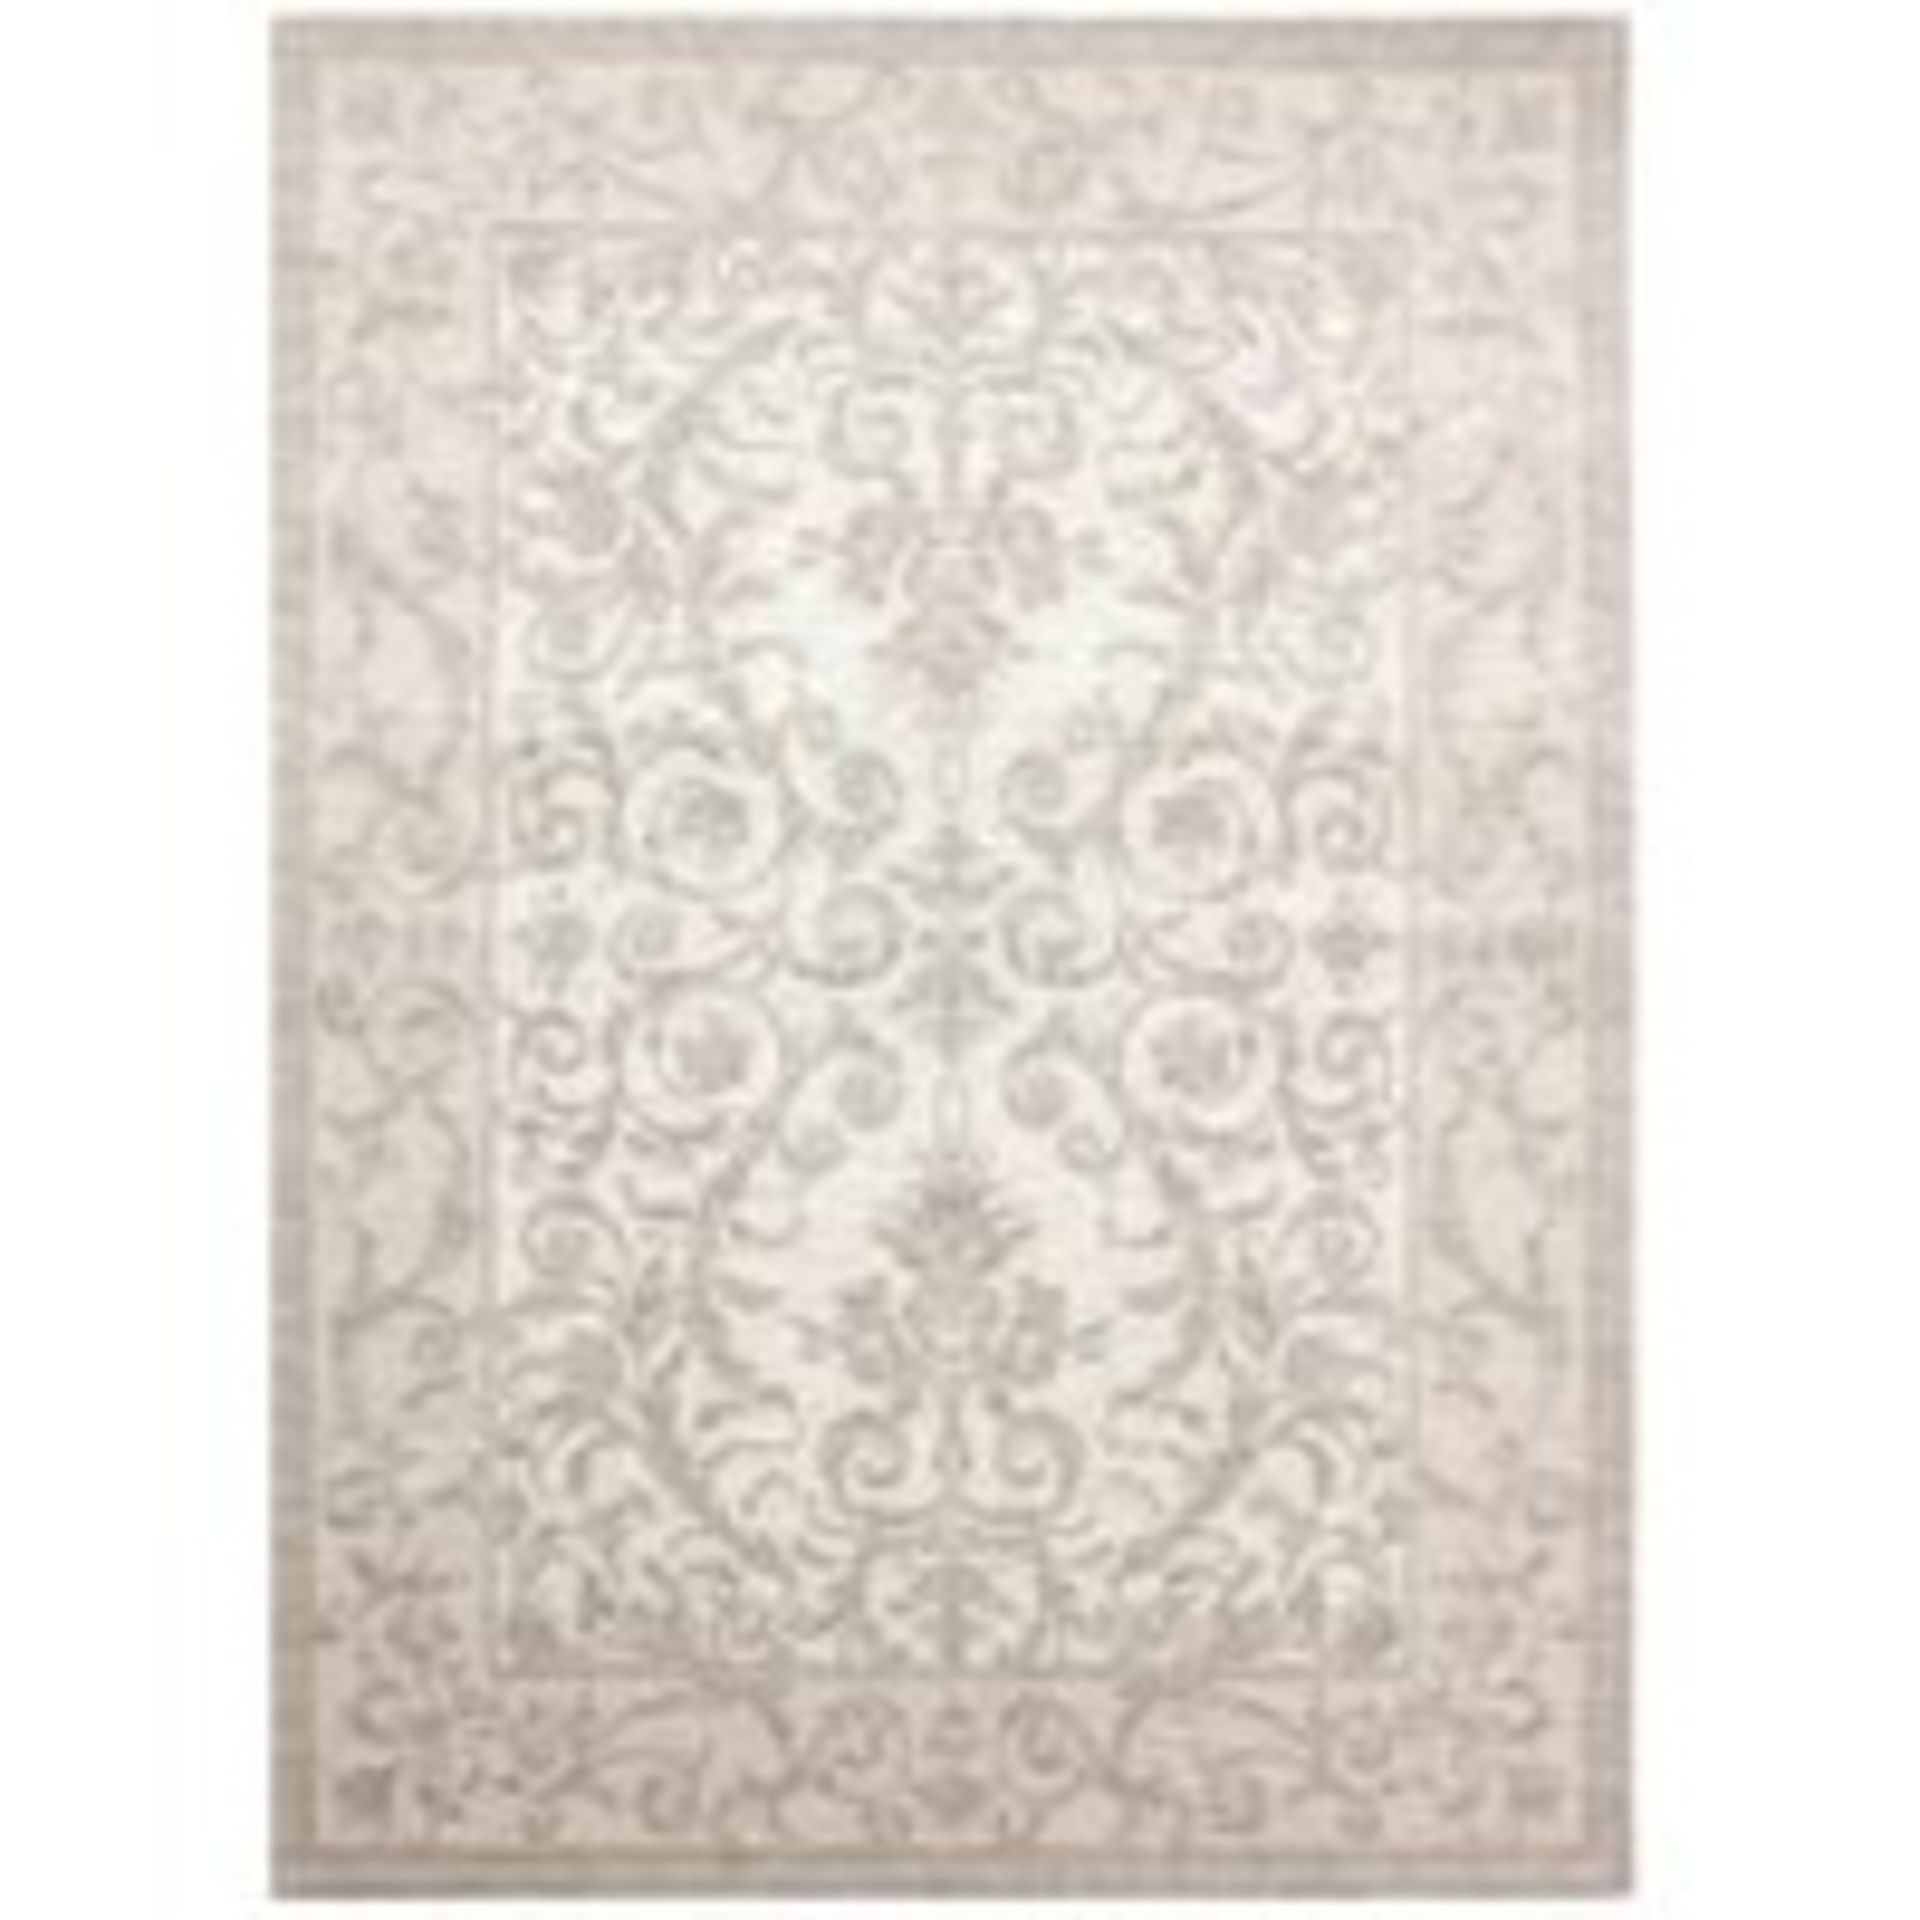 Dorma Regency Chnill Dorma Chenille D040 Natural Rectangle Rug 200X290cm RRP 449.00 About the